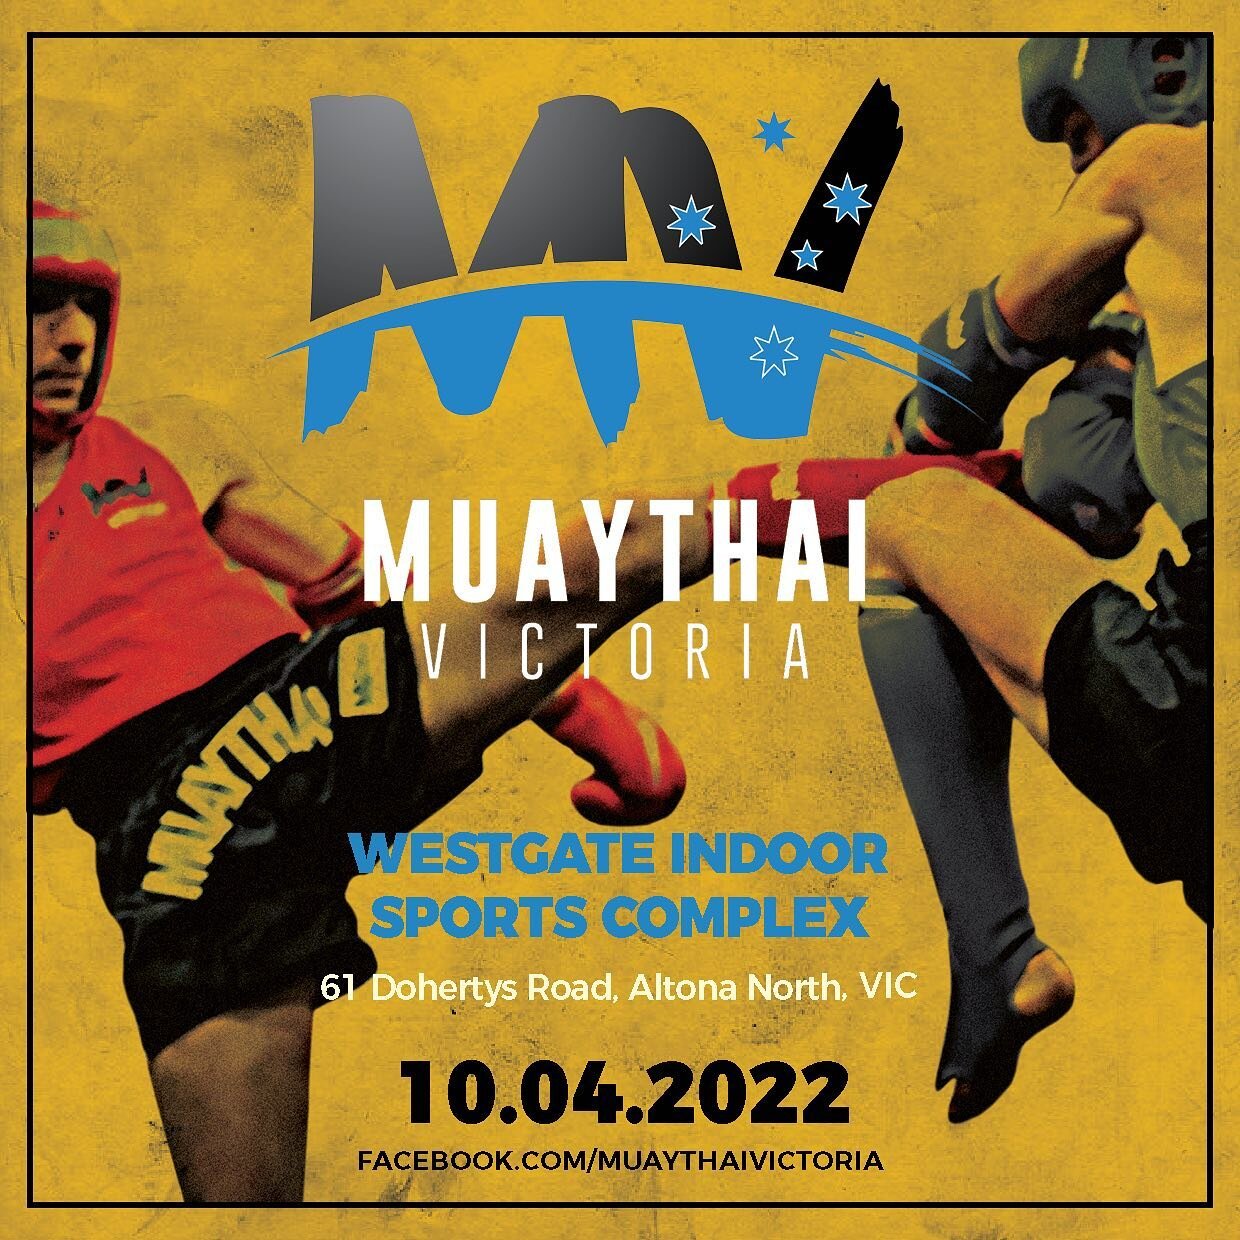 Next Muaythai Victoria event coming up in three weeks.
Part of a regular monthly schedule of events!